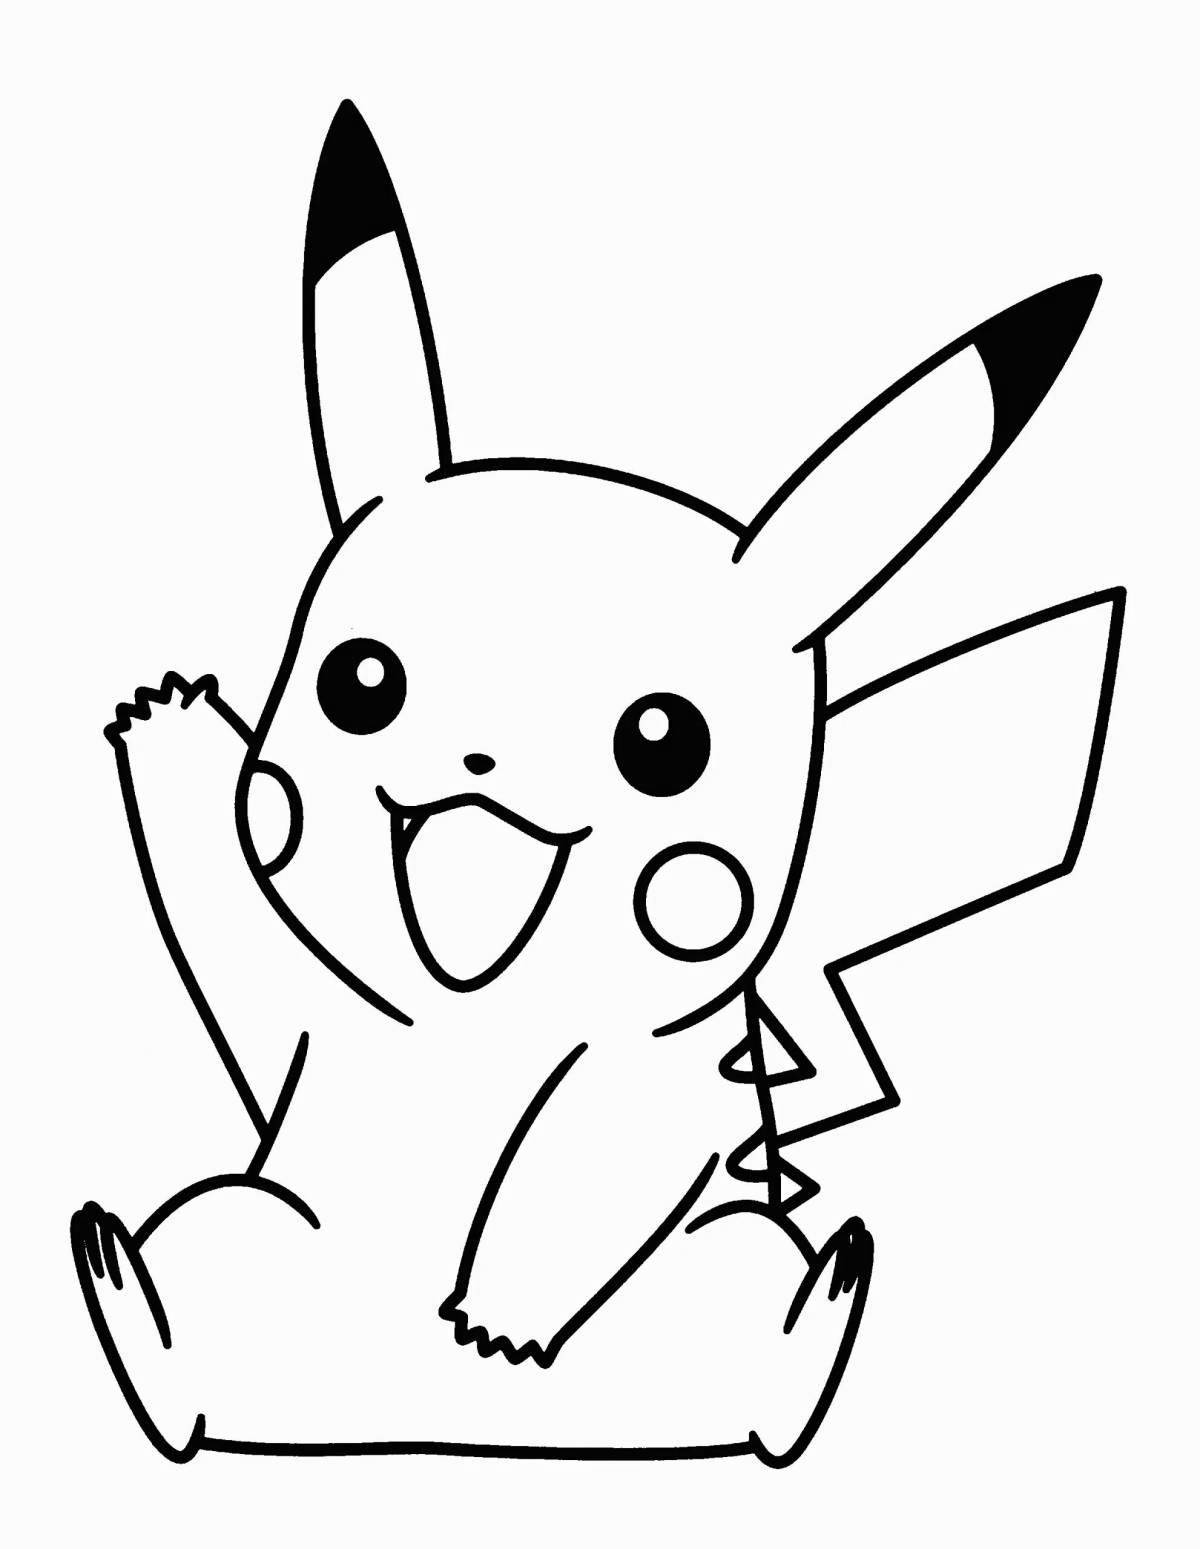 Sparkling pikachu coloring page